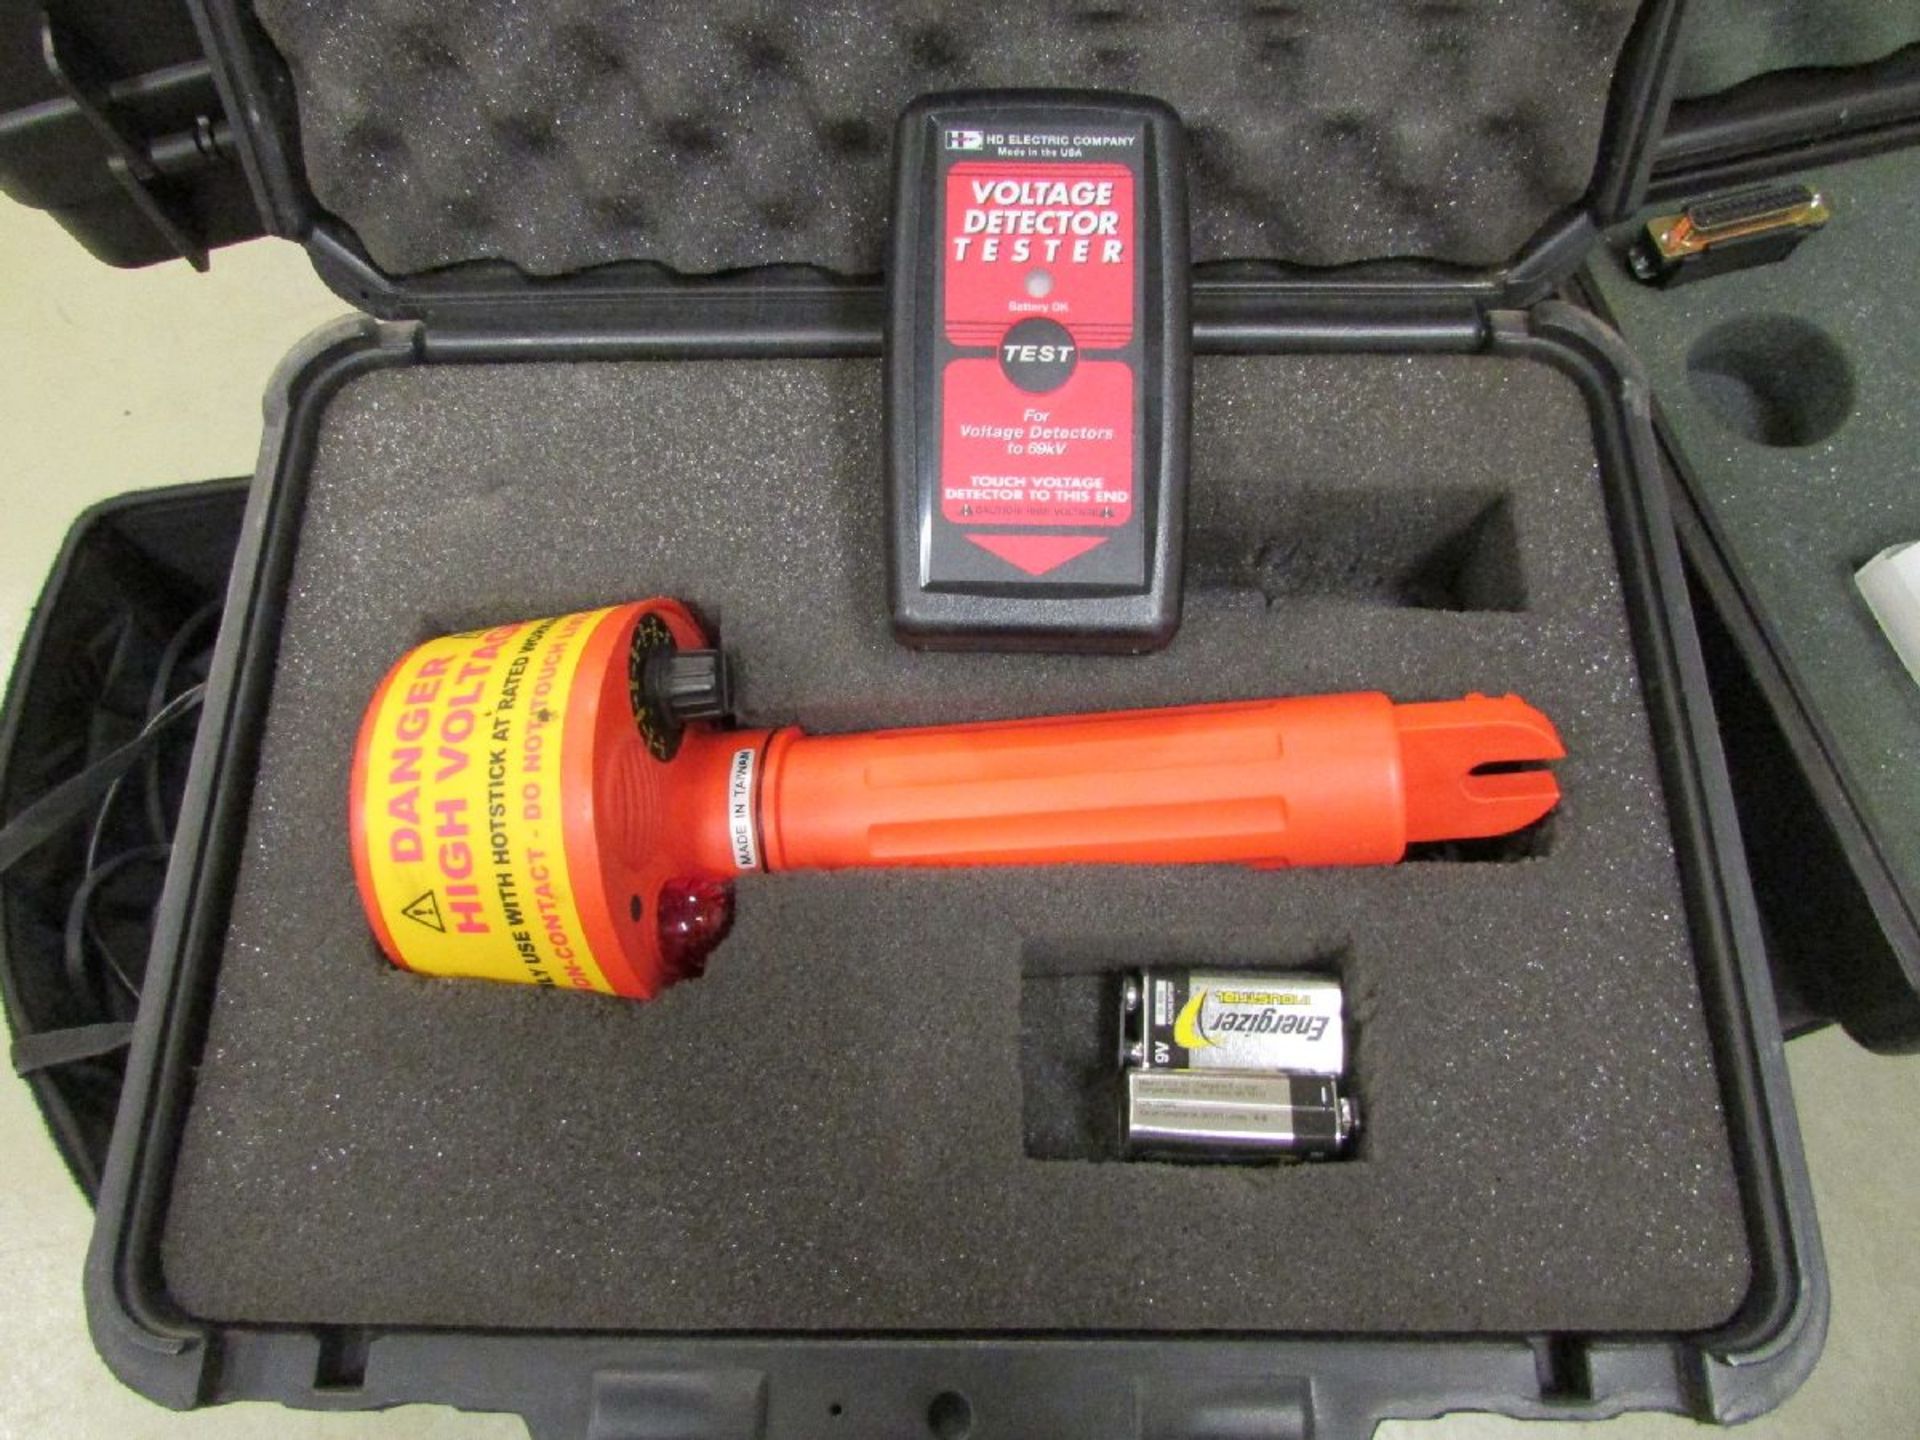 AEMC Model 275HVD Non-Contact High Voltage Detector - Image 4 of 4